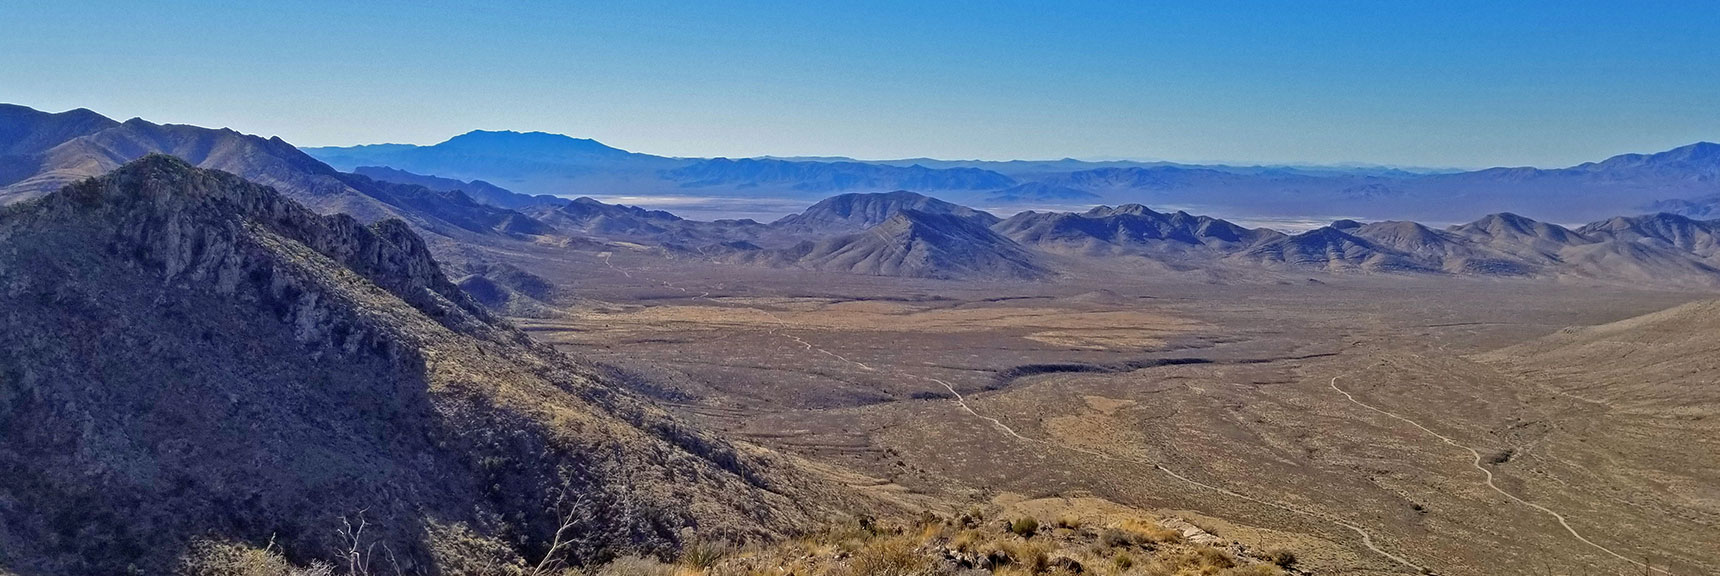 View Down to the Split Between Mexican Spring Road (left) and Potosi Pass Rd (right) | Potosi Mt. Summit via Western Cliffs Ridgeline, Spring Mountains, Nevada